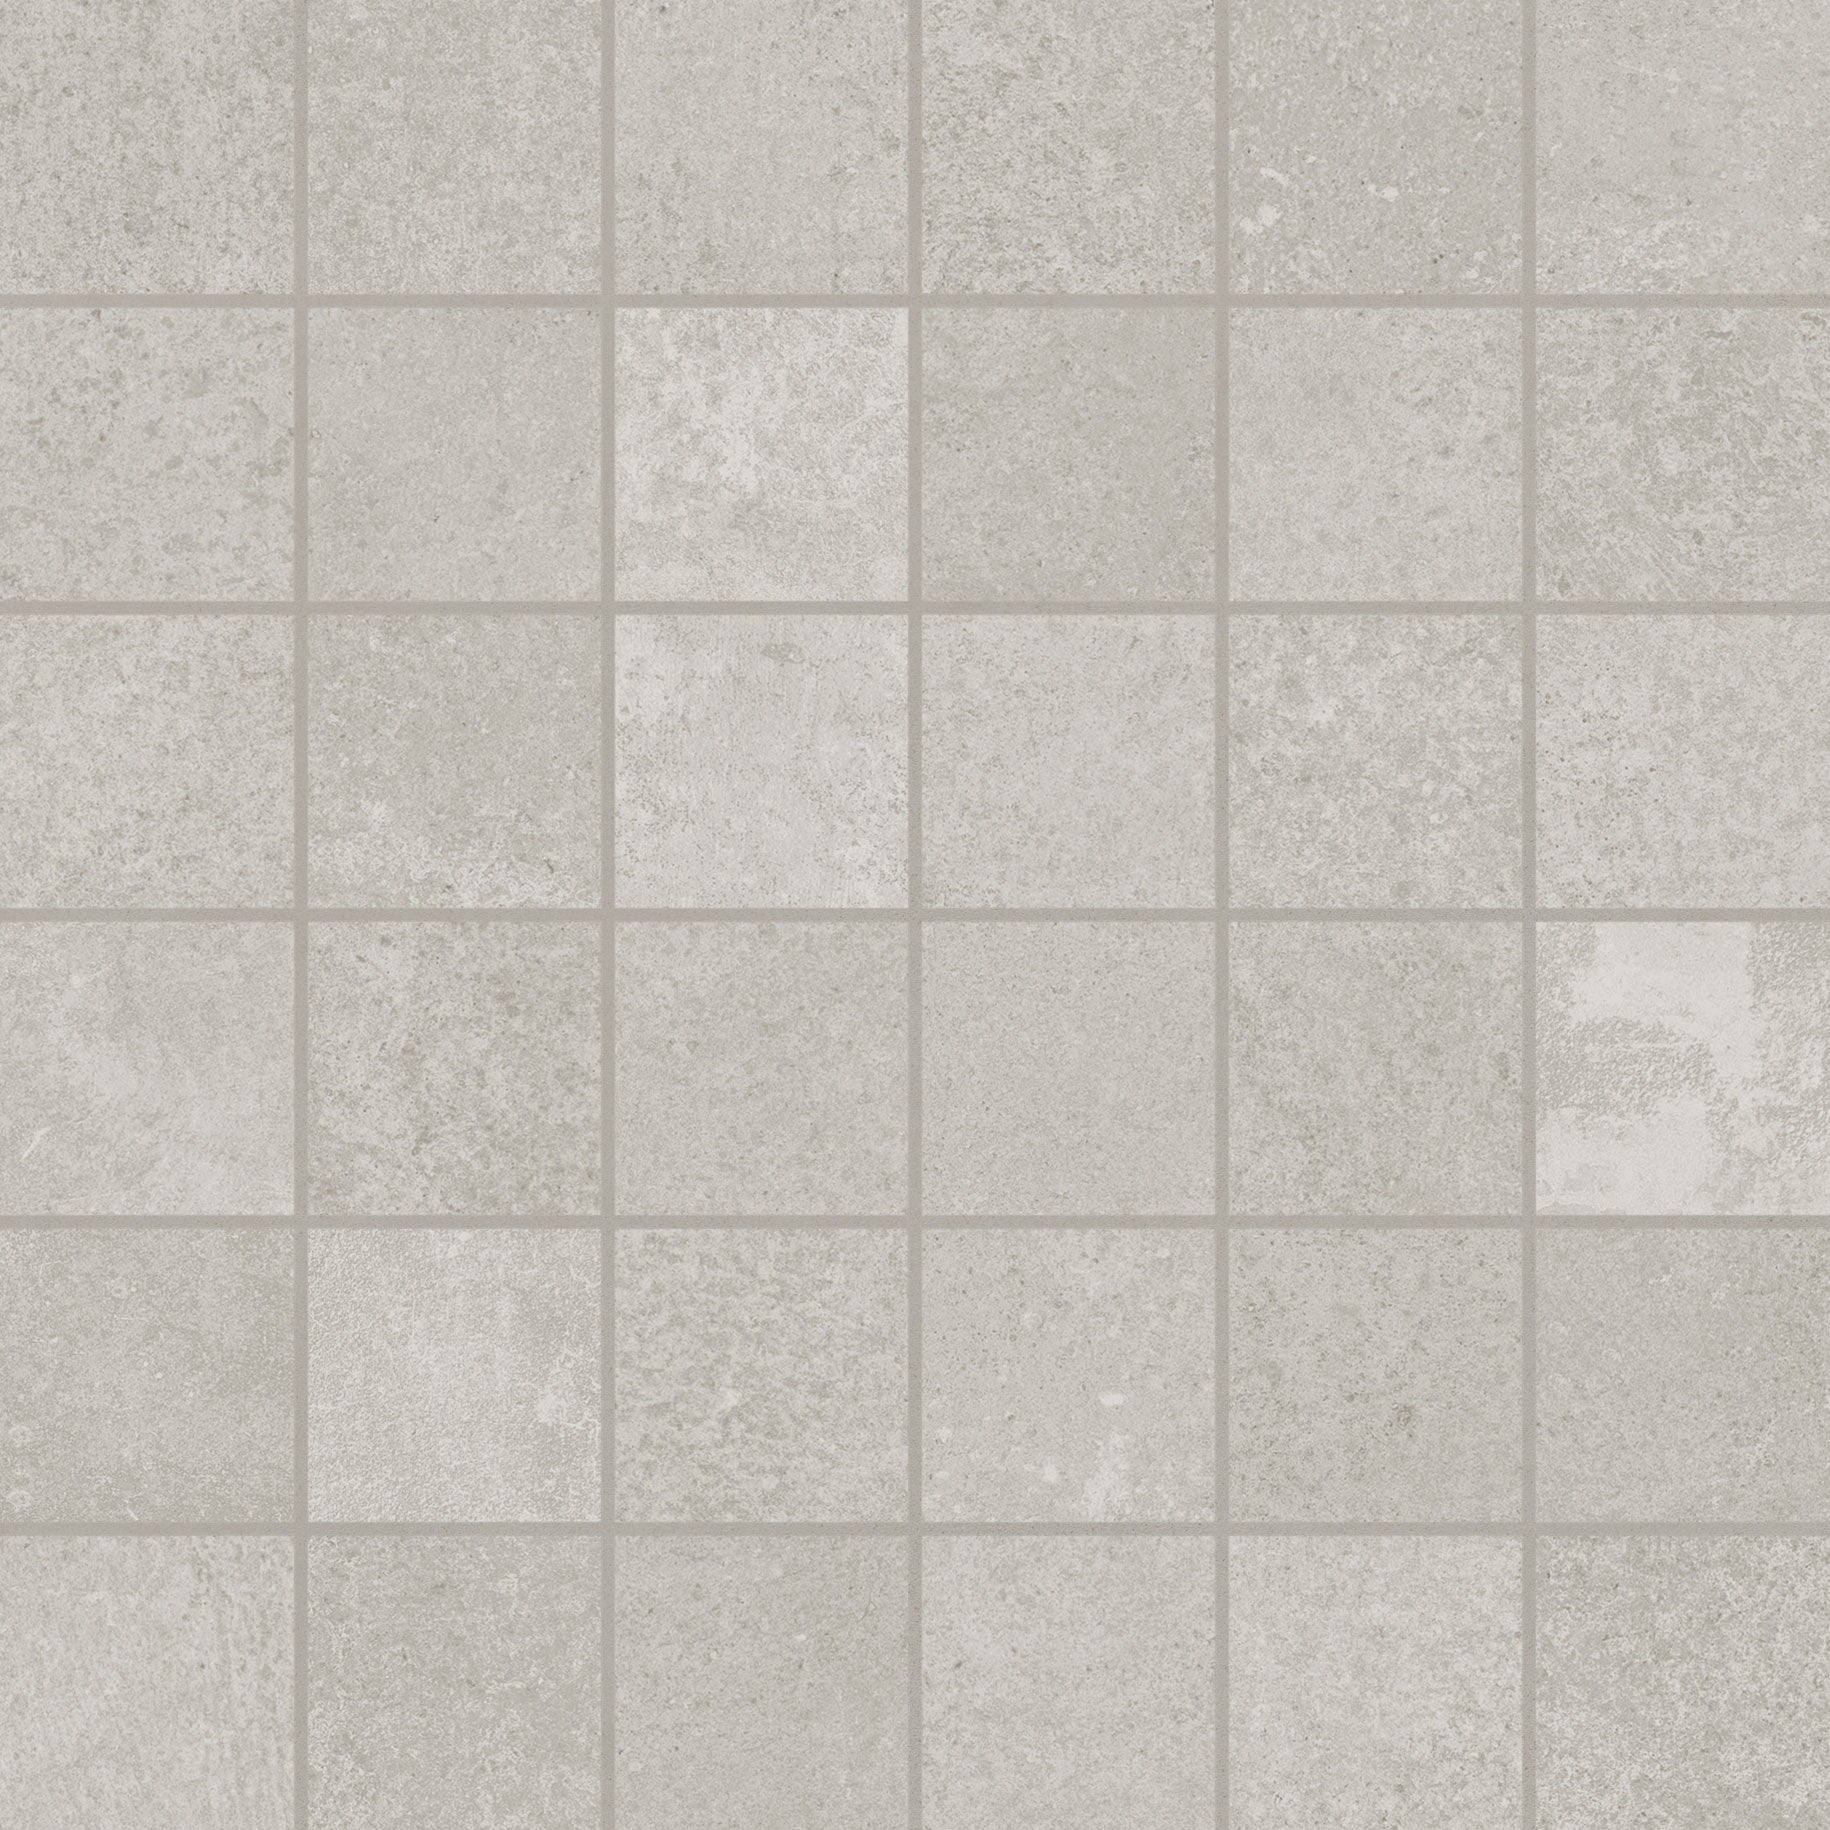 landmark 9mm madein passion silver straight stack 2x2 mosaic 12x12x9mm matte rectified porcelain tile distributed by surface group international